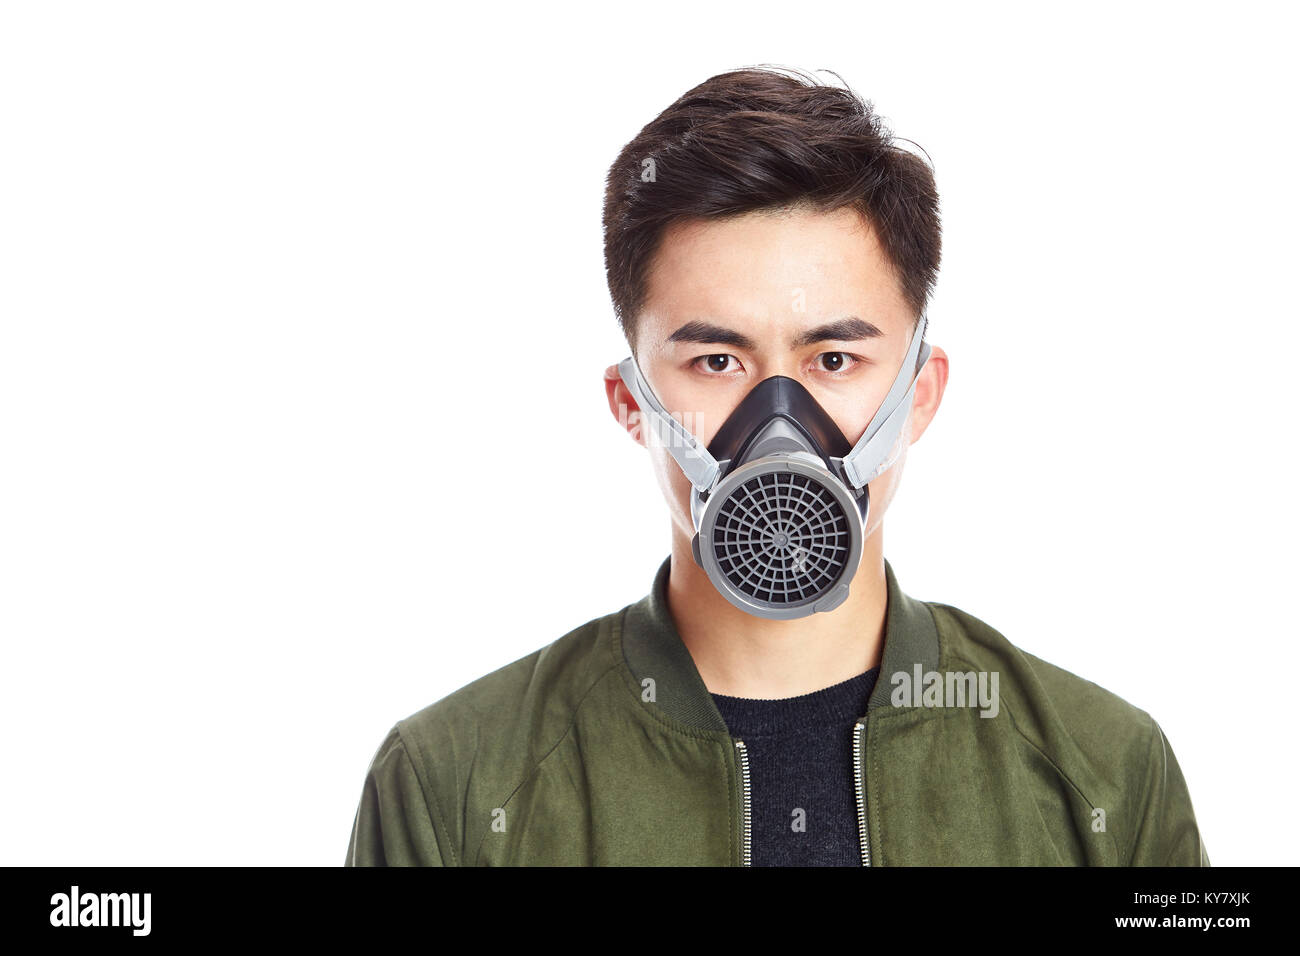 studio shot of a young asian man wearing a gas mask, looking at camera, isolated on white background. Stock Photo